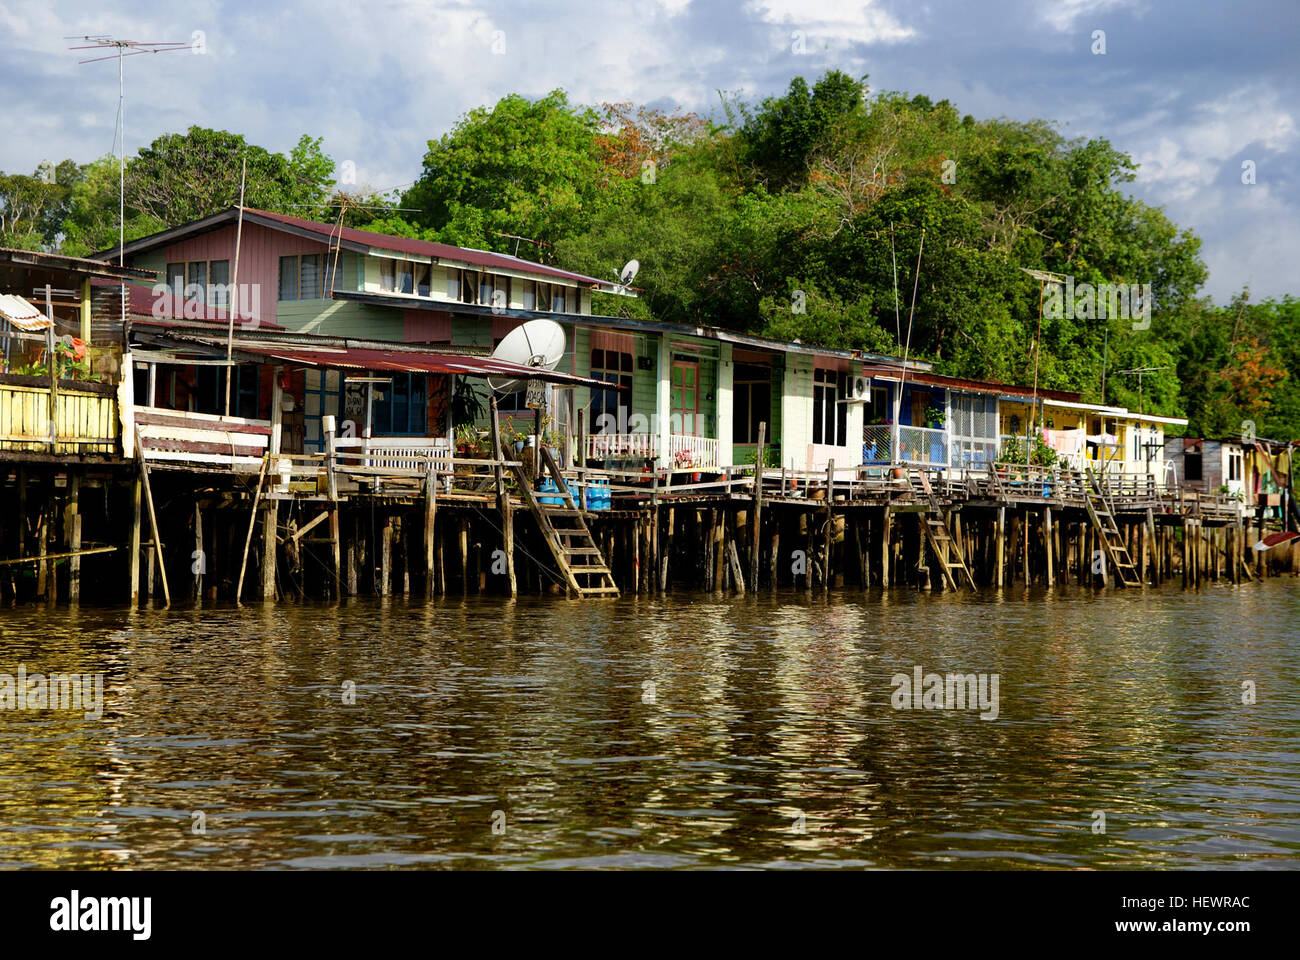 Home to around 30,000 people, Kampong Ayer consists of 42 contiguous stilt villages built along the banks of the Sungai Brunei. A century ago, half of Brunei's population lived here, and even today many Bruneians still prefer the lifestyle of the water village to residency on dry land. The village has its own schools, mosques, police stations and fire brigade. To get across the river, just stand somewhere a water taxi can dock and flag one down (the fare is B$1).  Founded at least 1000 years ago, the village is considered the largest stilt settlement in the world. When Venetian scholar Antonio Stock Photo